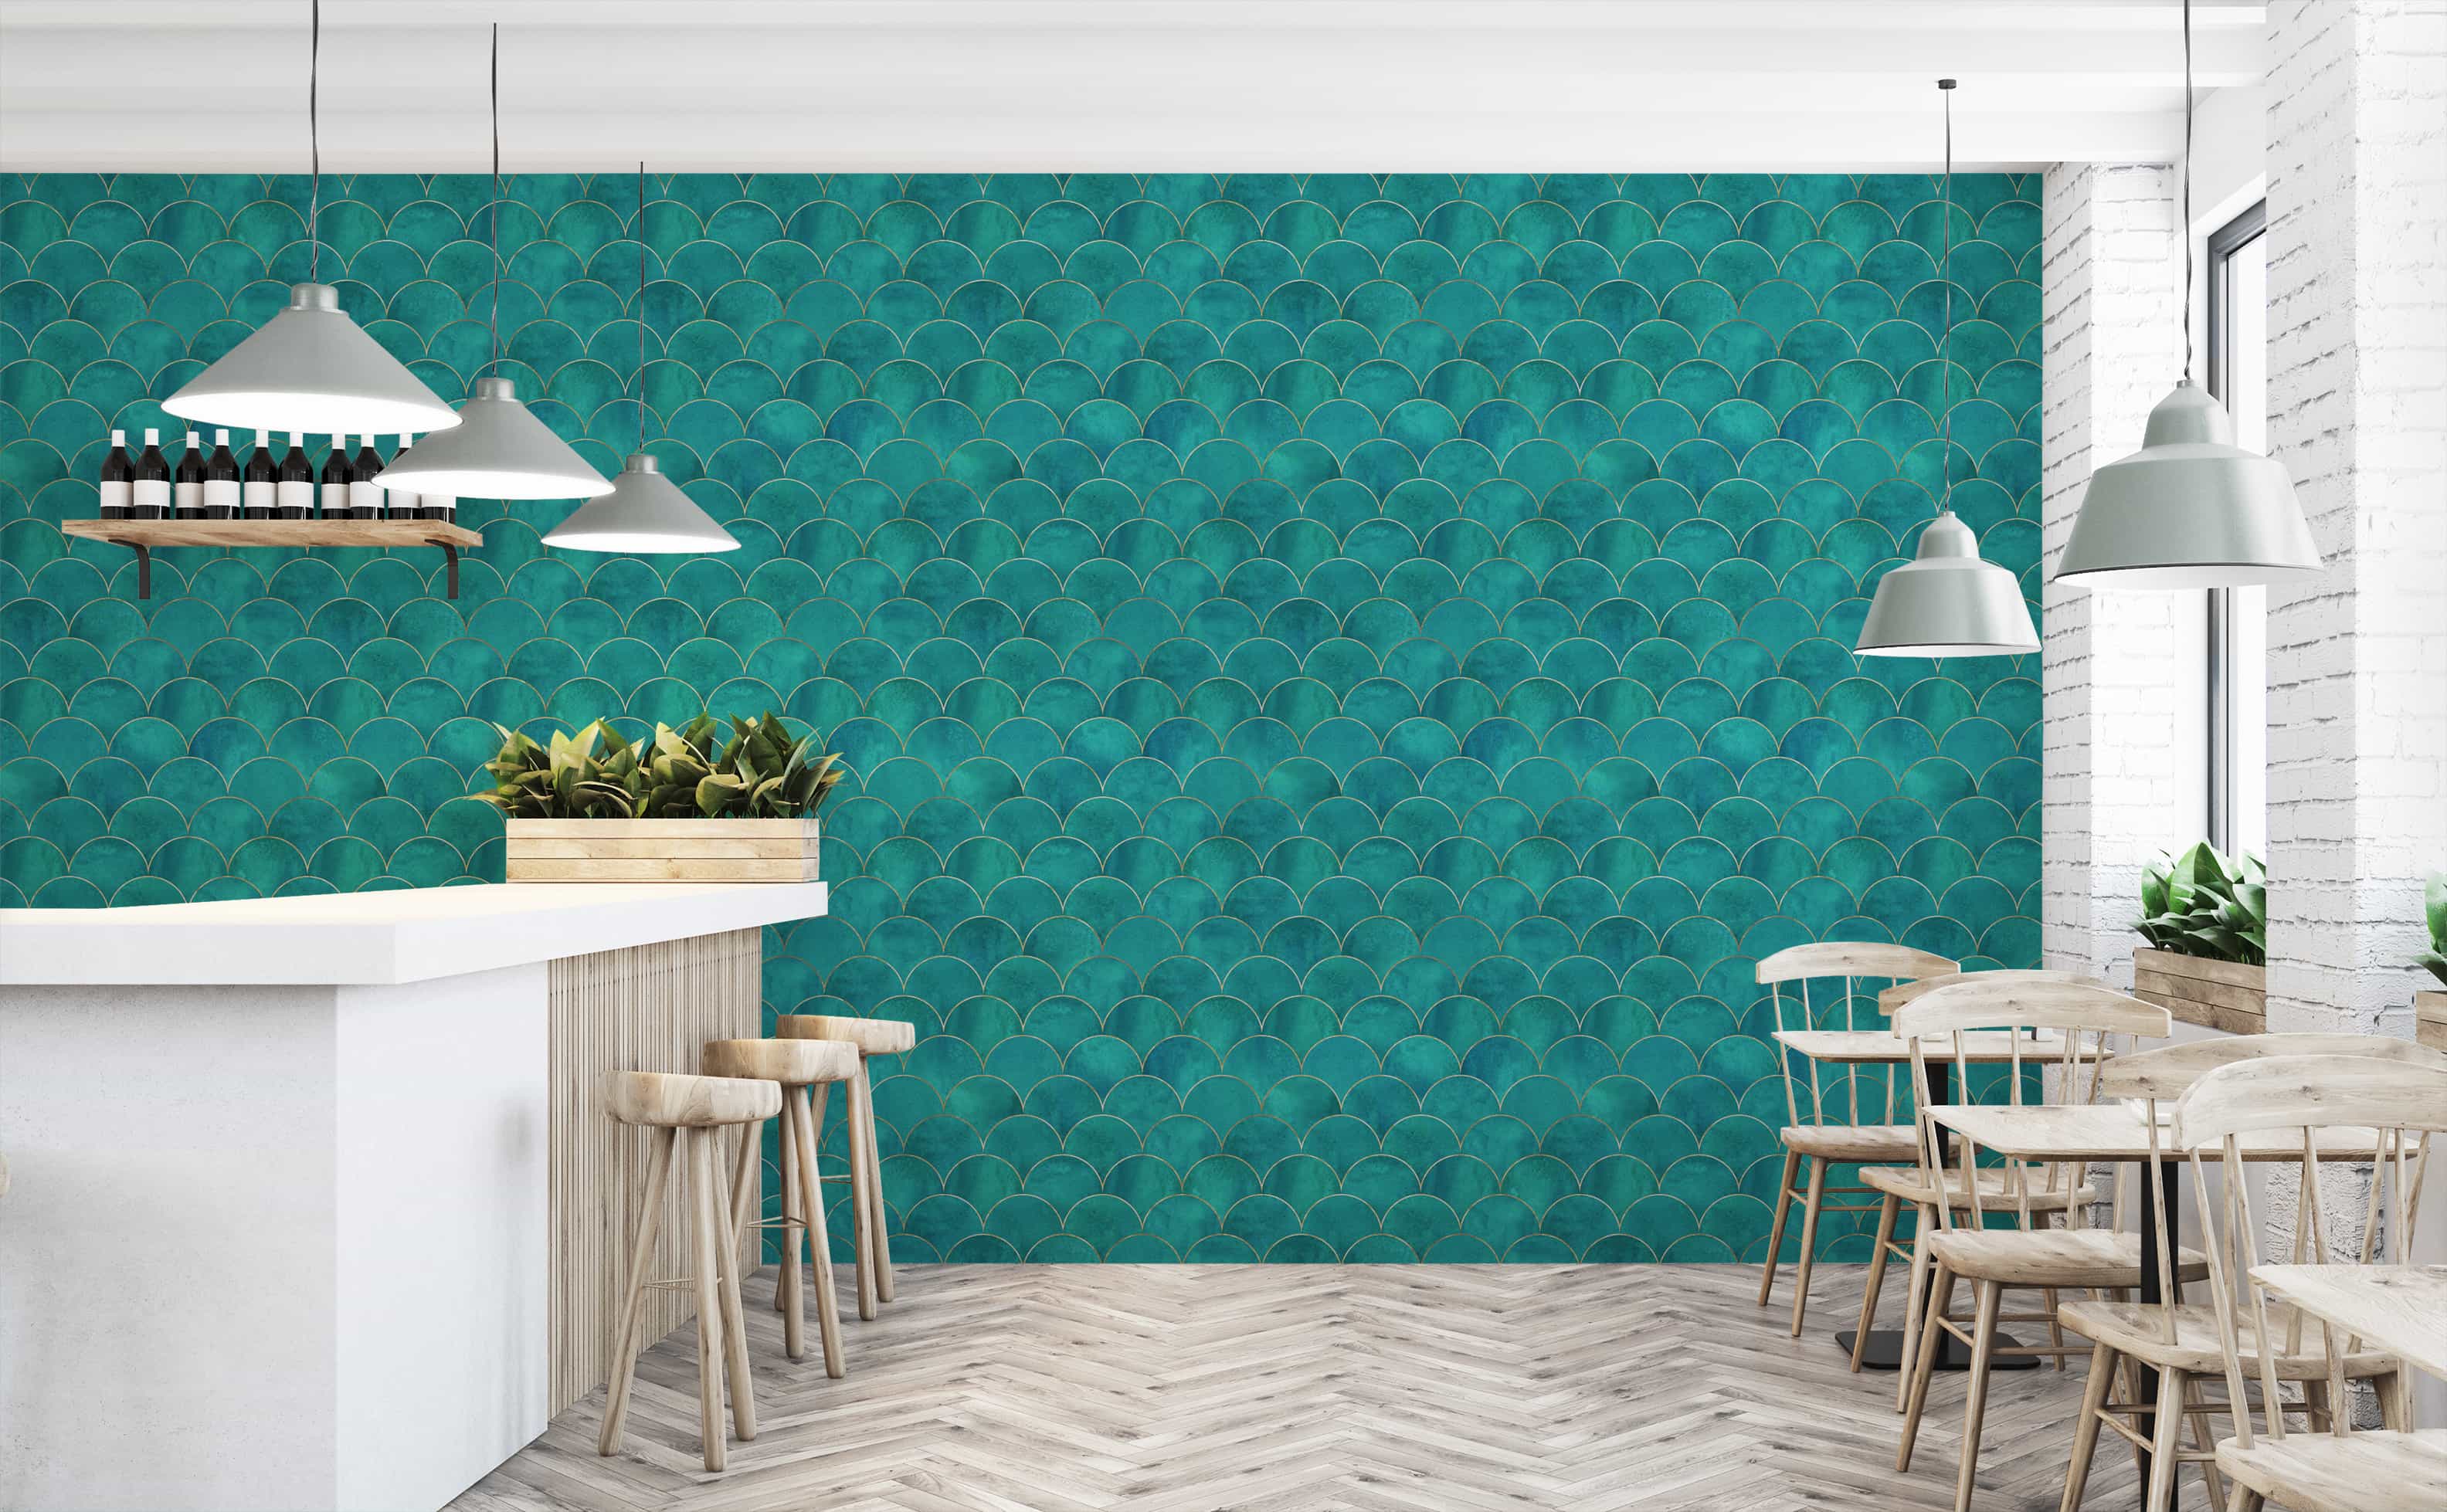 Tempaper Teal Green Beadboard Vinyl Peel and Stick Removable Wallpaper 28  sq ft BD15049  The Home Depot